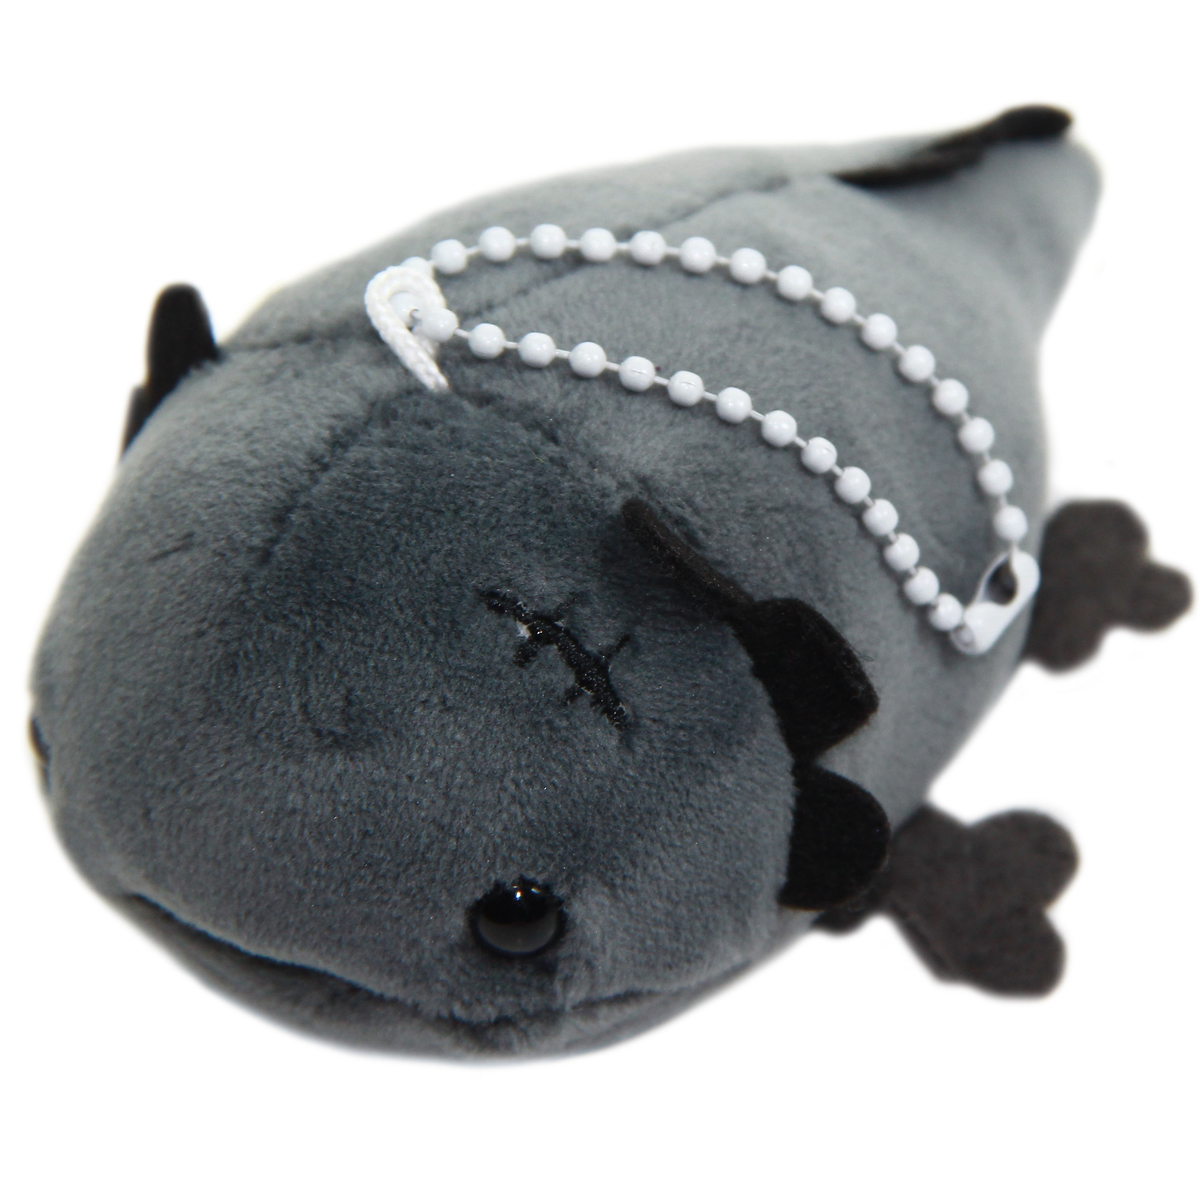 Kawaii Axolotl Plushie Small Keychain Collection Super Soft Plush Toy Black Grey 4 Inches